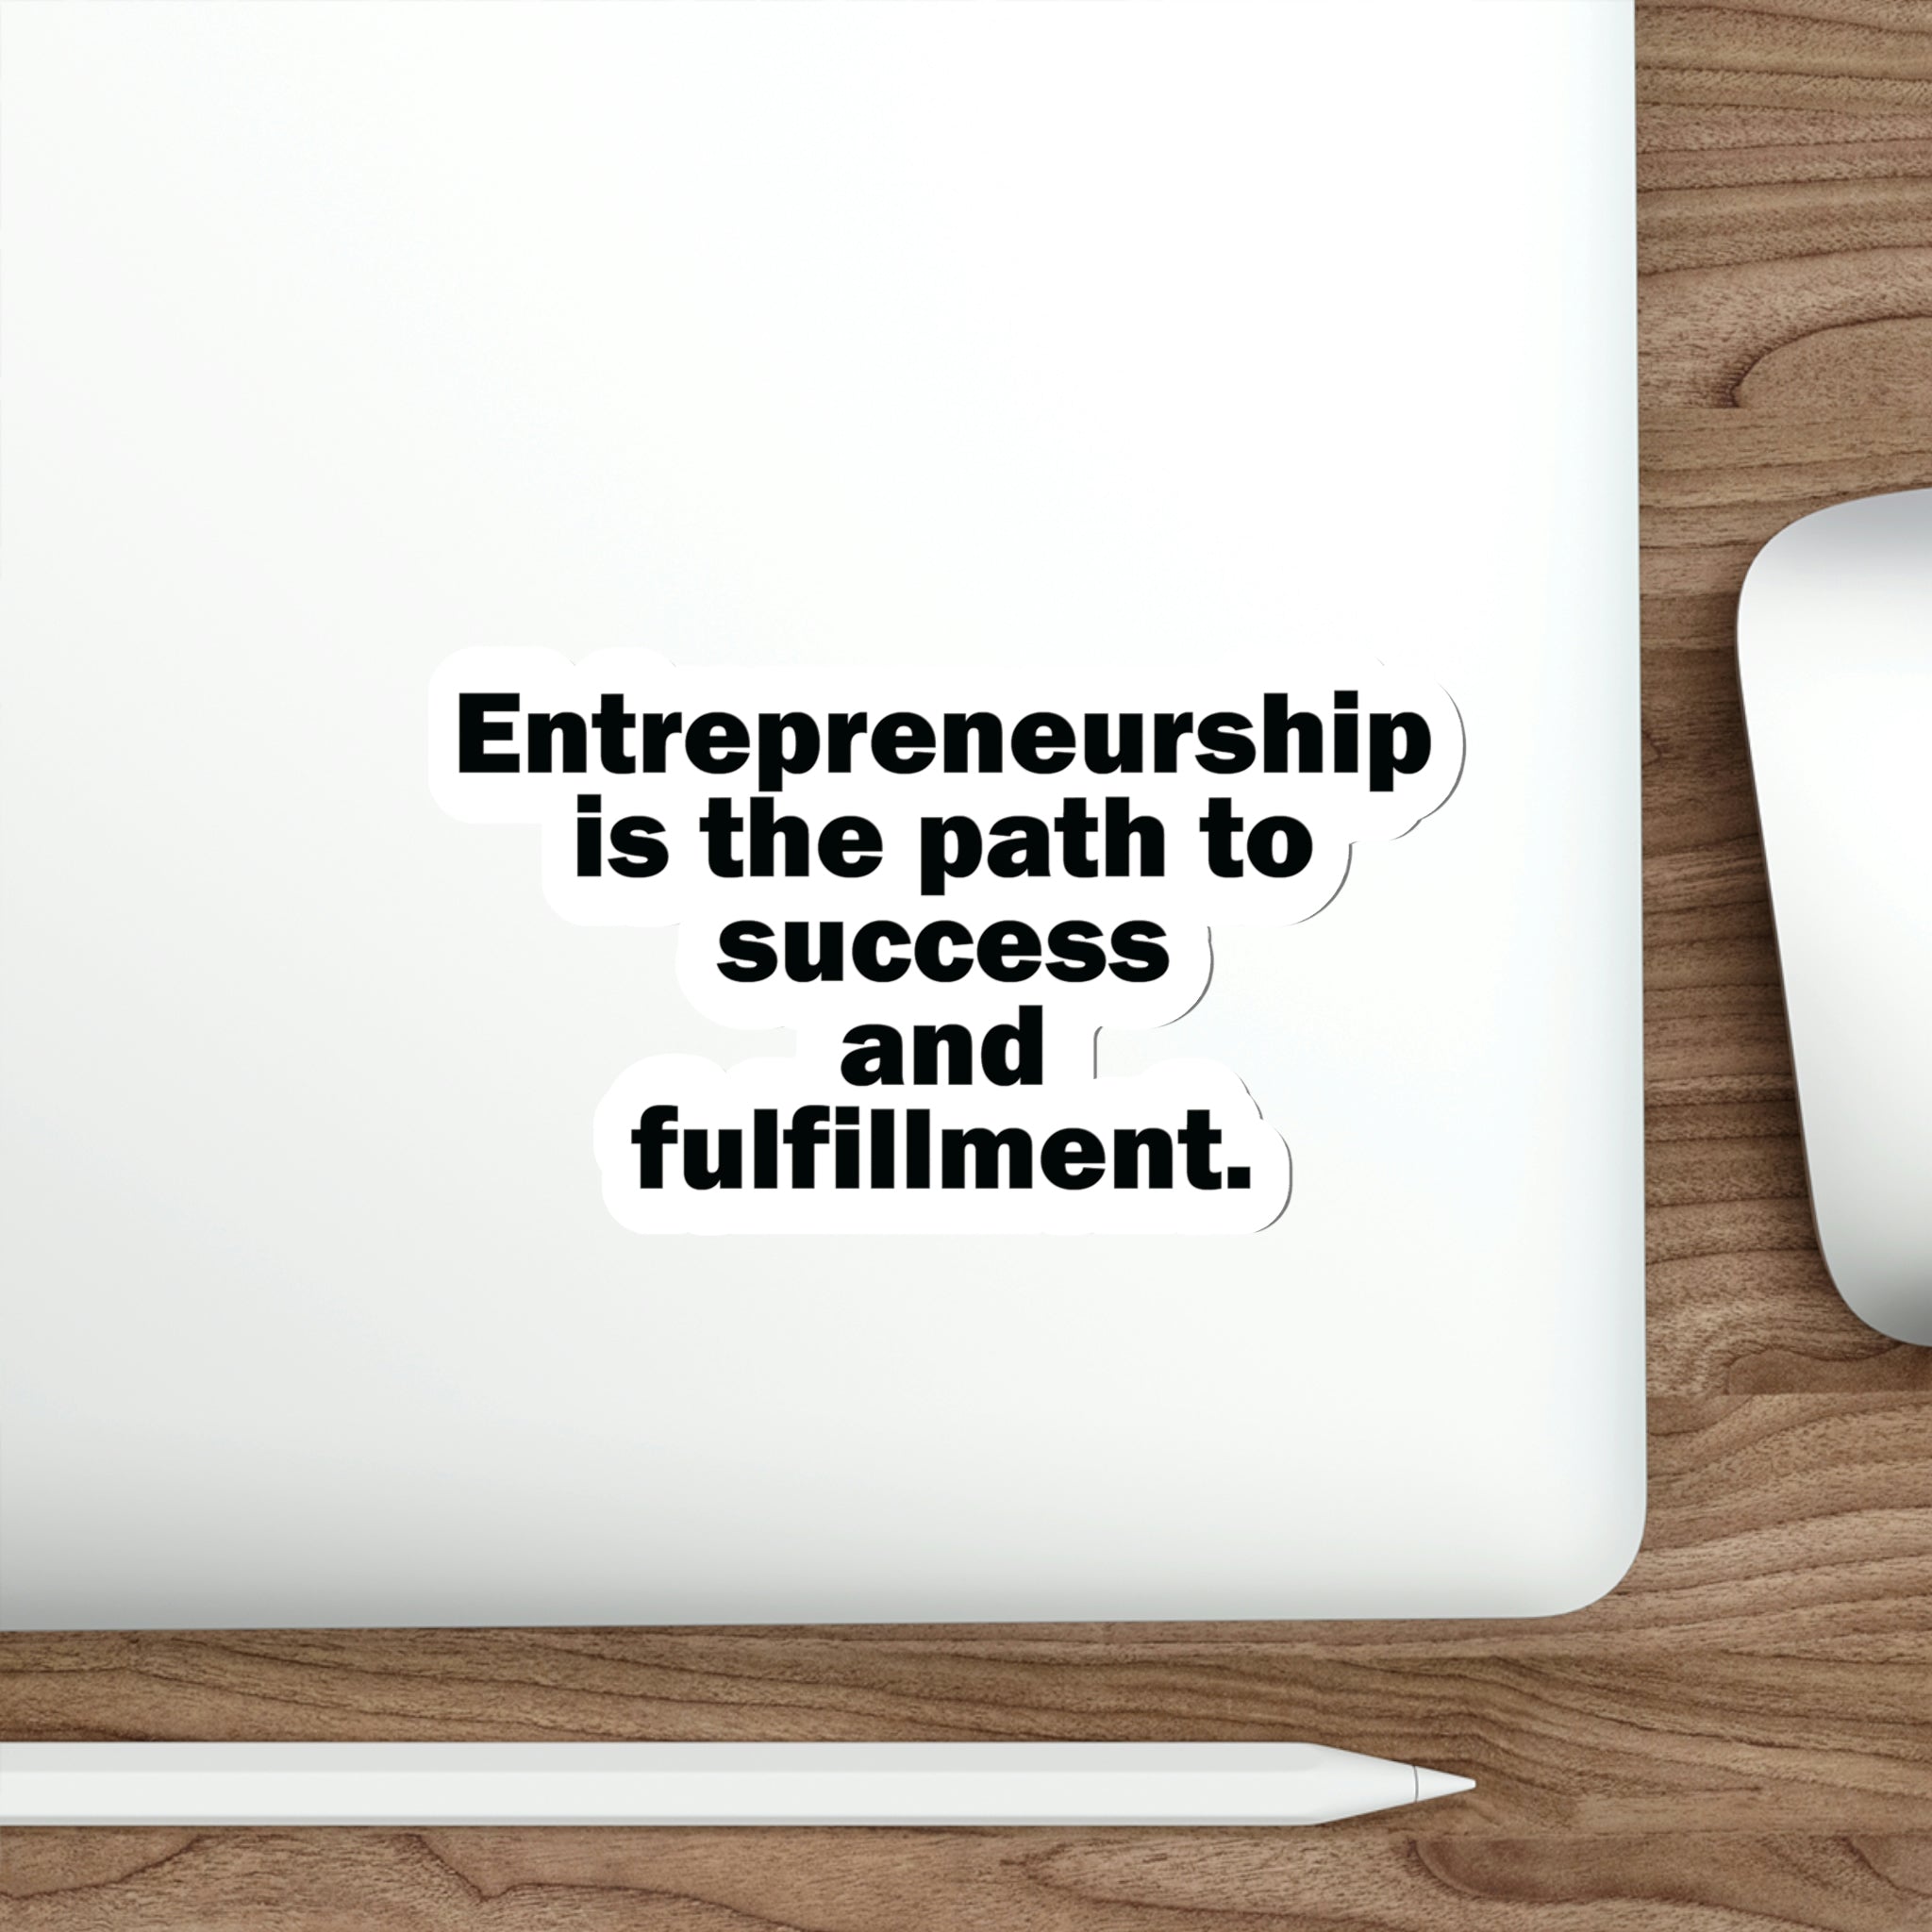 Entrepreneurship: The Path to Success and Fulfillment | Shop Now  #size_6x6-inches